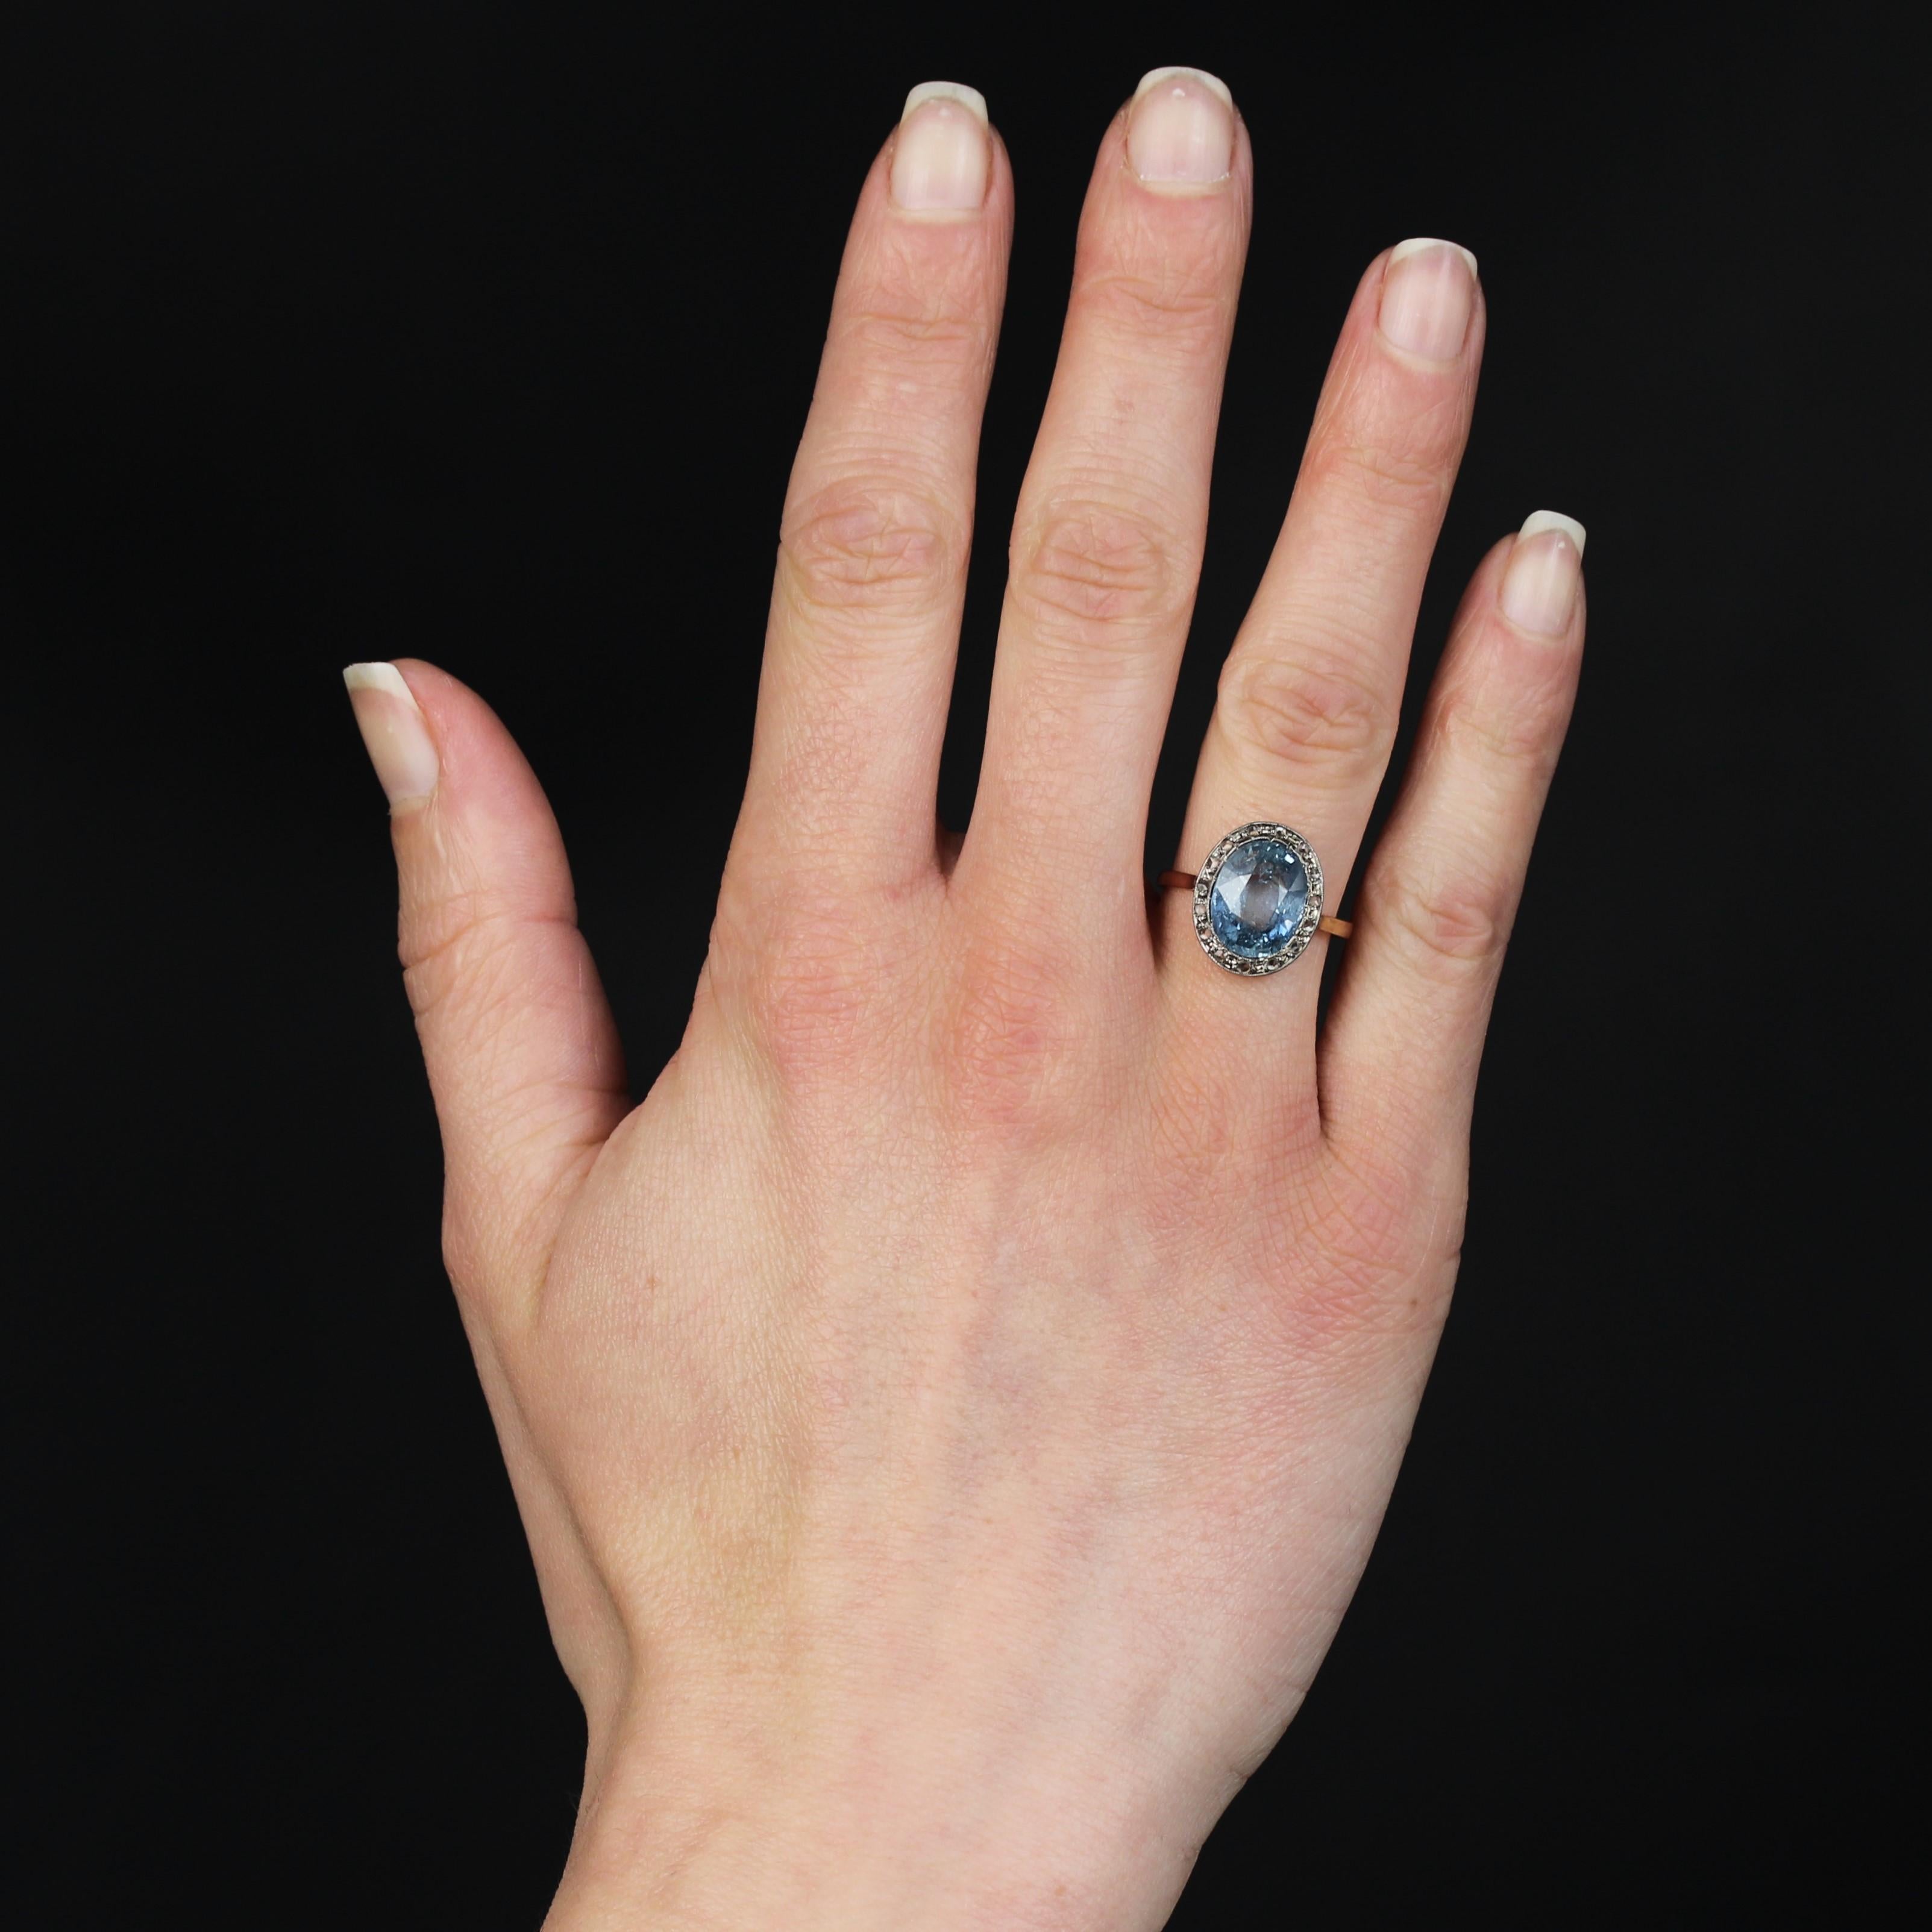 Ring in 18 karat rose gold.
A charming antique ring with a very flat, oval-shaped setting featuring a center-set natural light blue sapphire surrounded by platinum-set rose-cut diamonds. The underside is openworked with arabesque motifs.
Weight of